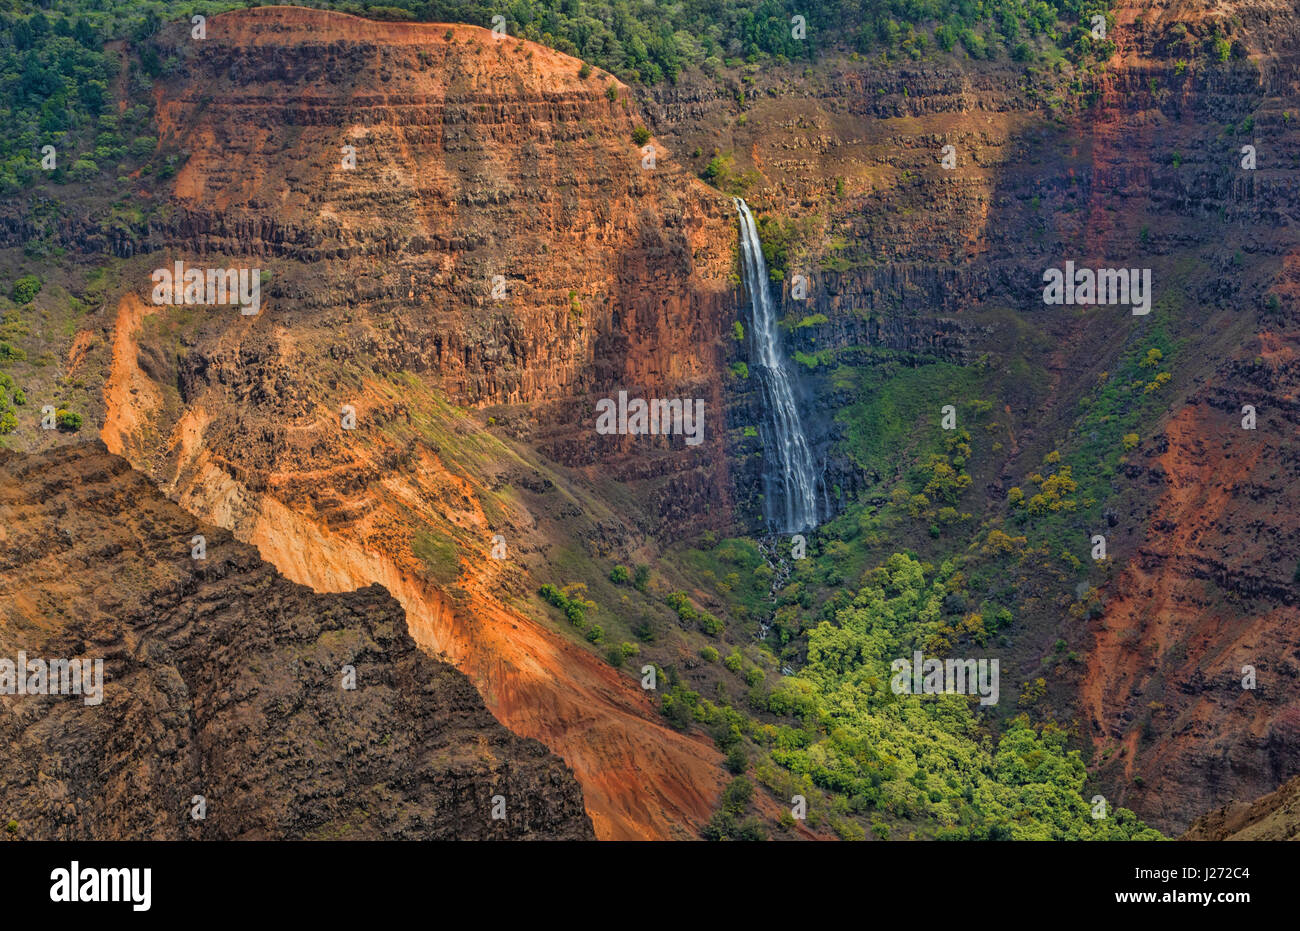 Kauai Hawaii scenic Waimea Canyon State Park red cliffs from above canyon with distant waterfall Stock Photo